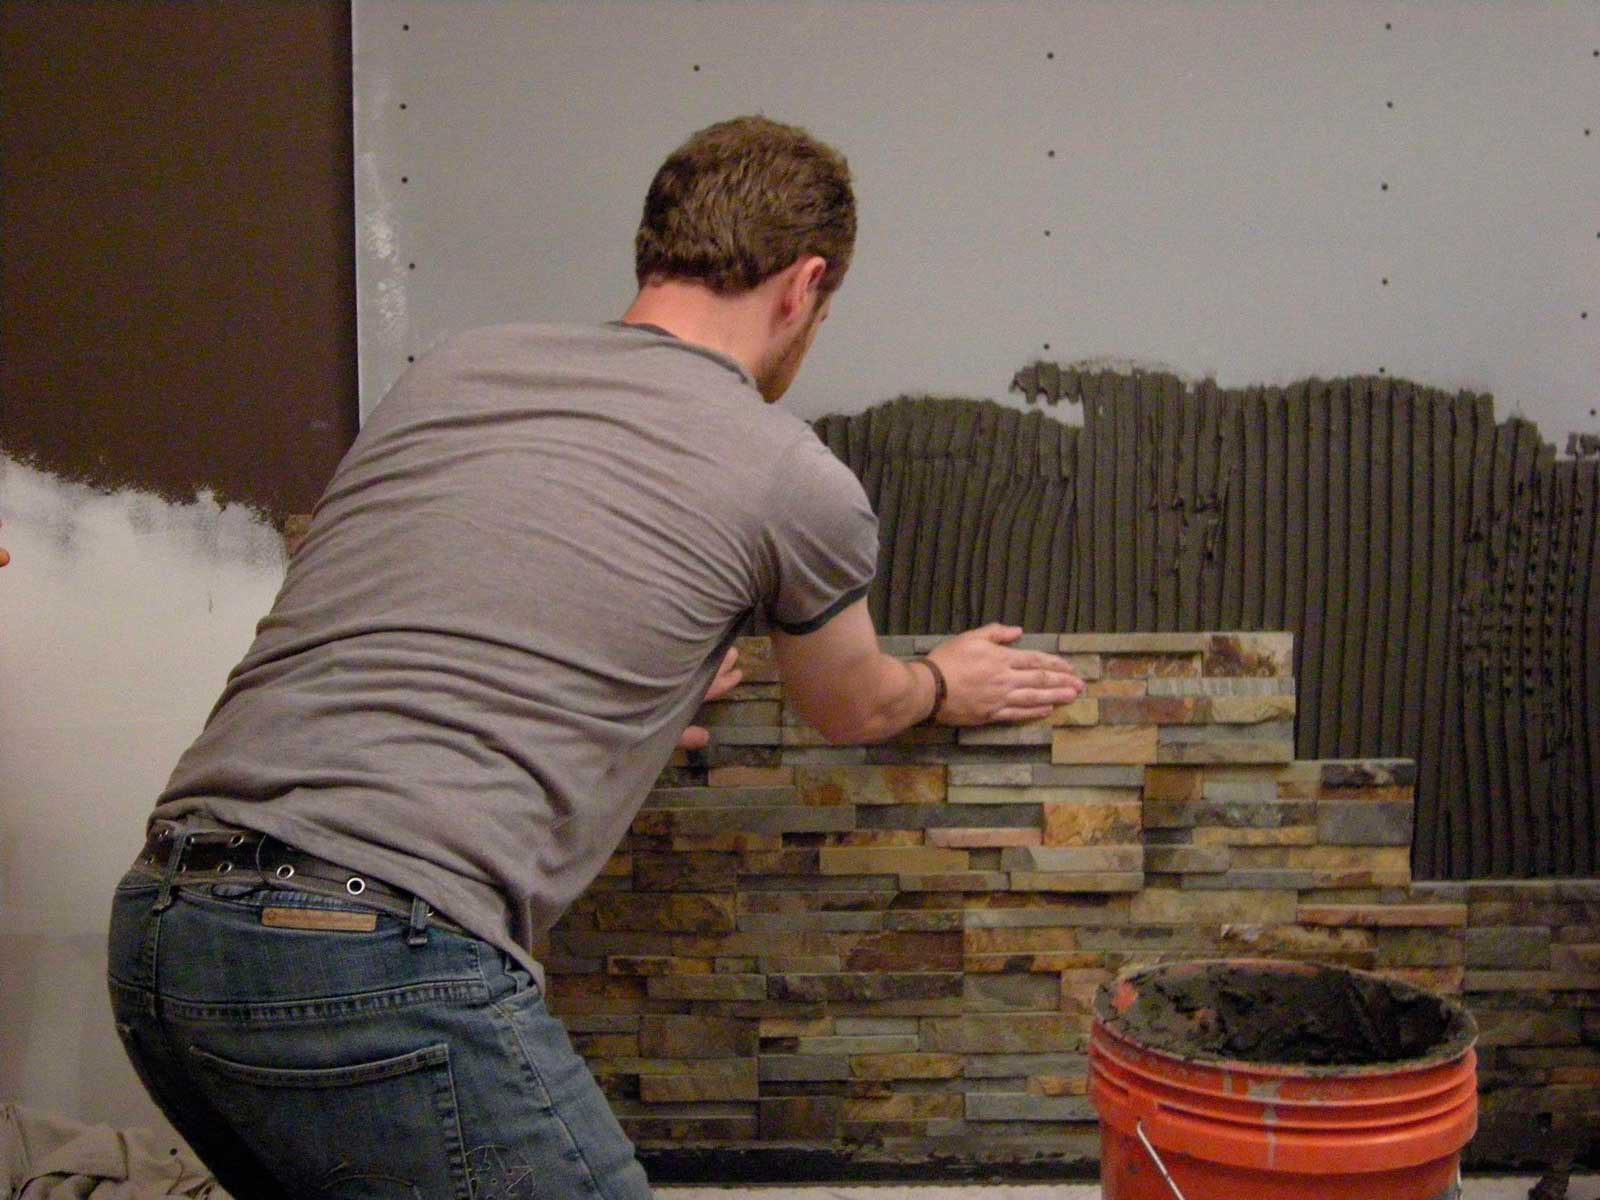 Thinset for Stone Veneer Installations Explained